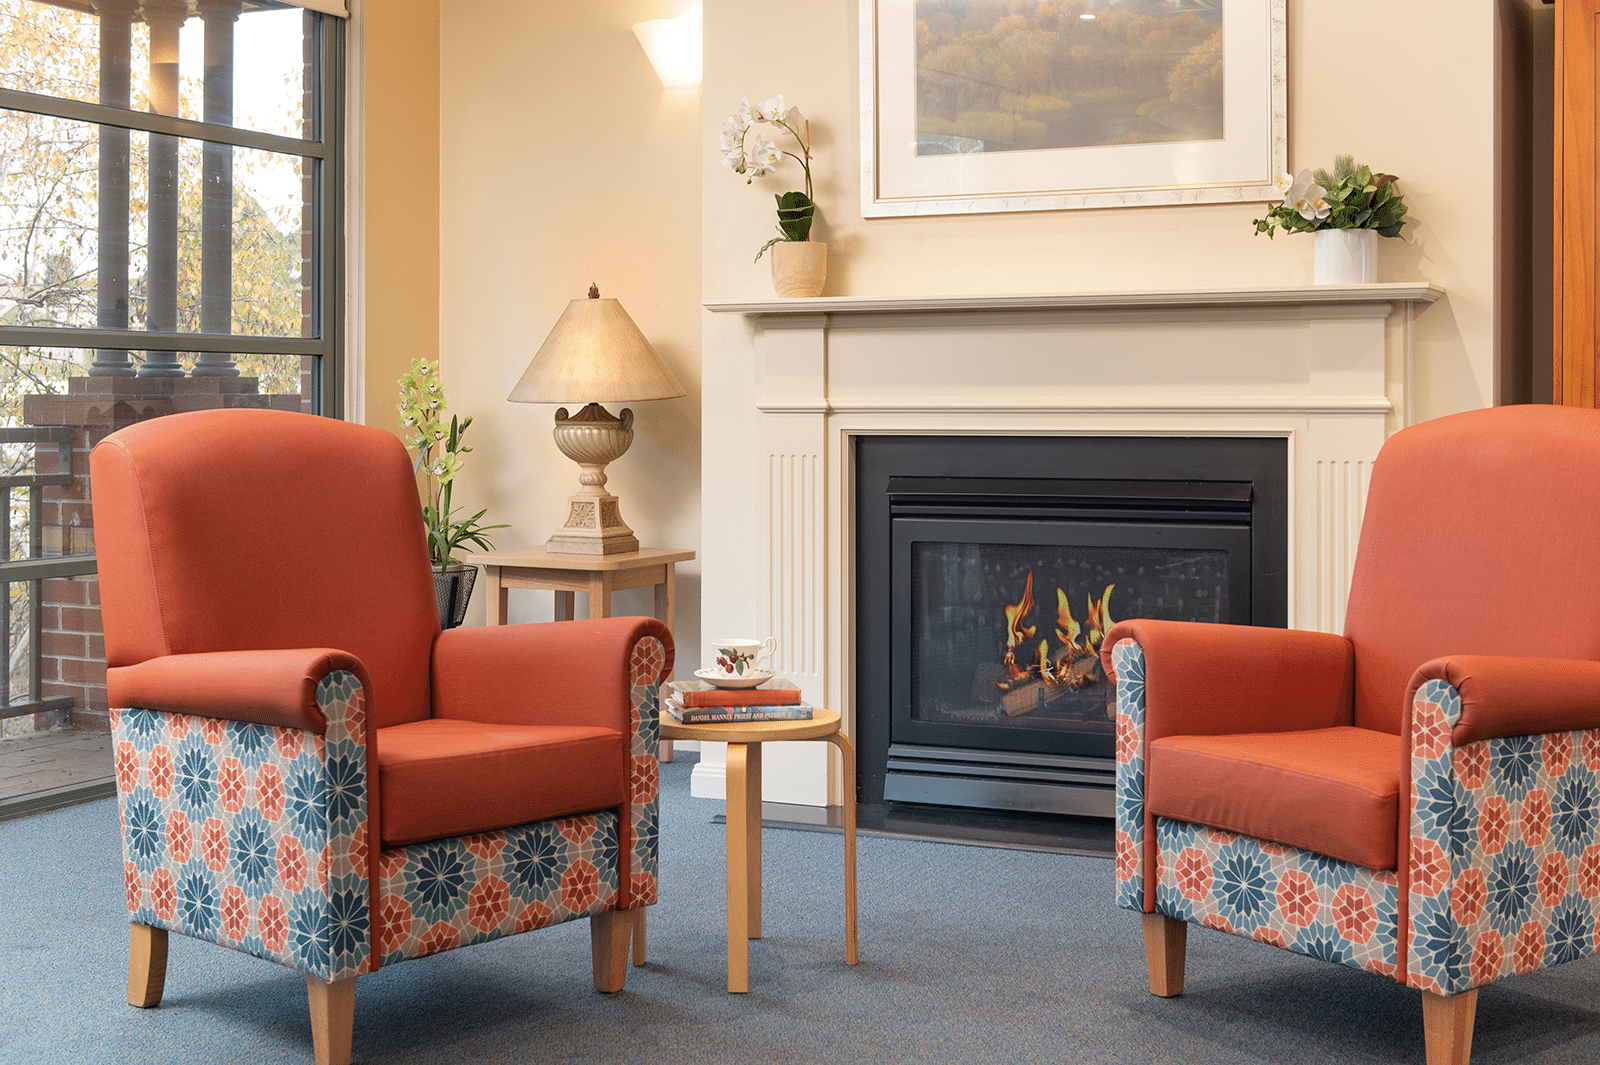 Two armchairs in a living room in front of a electric fire